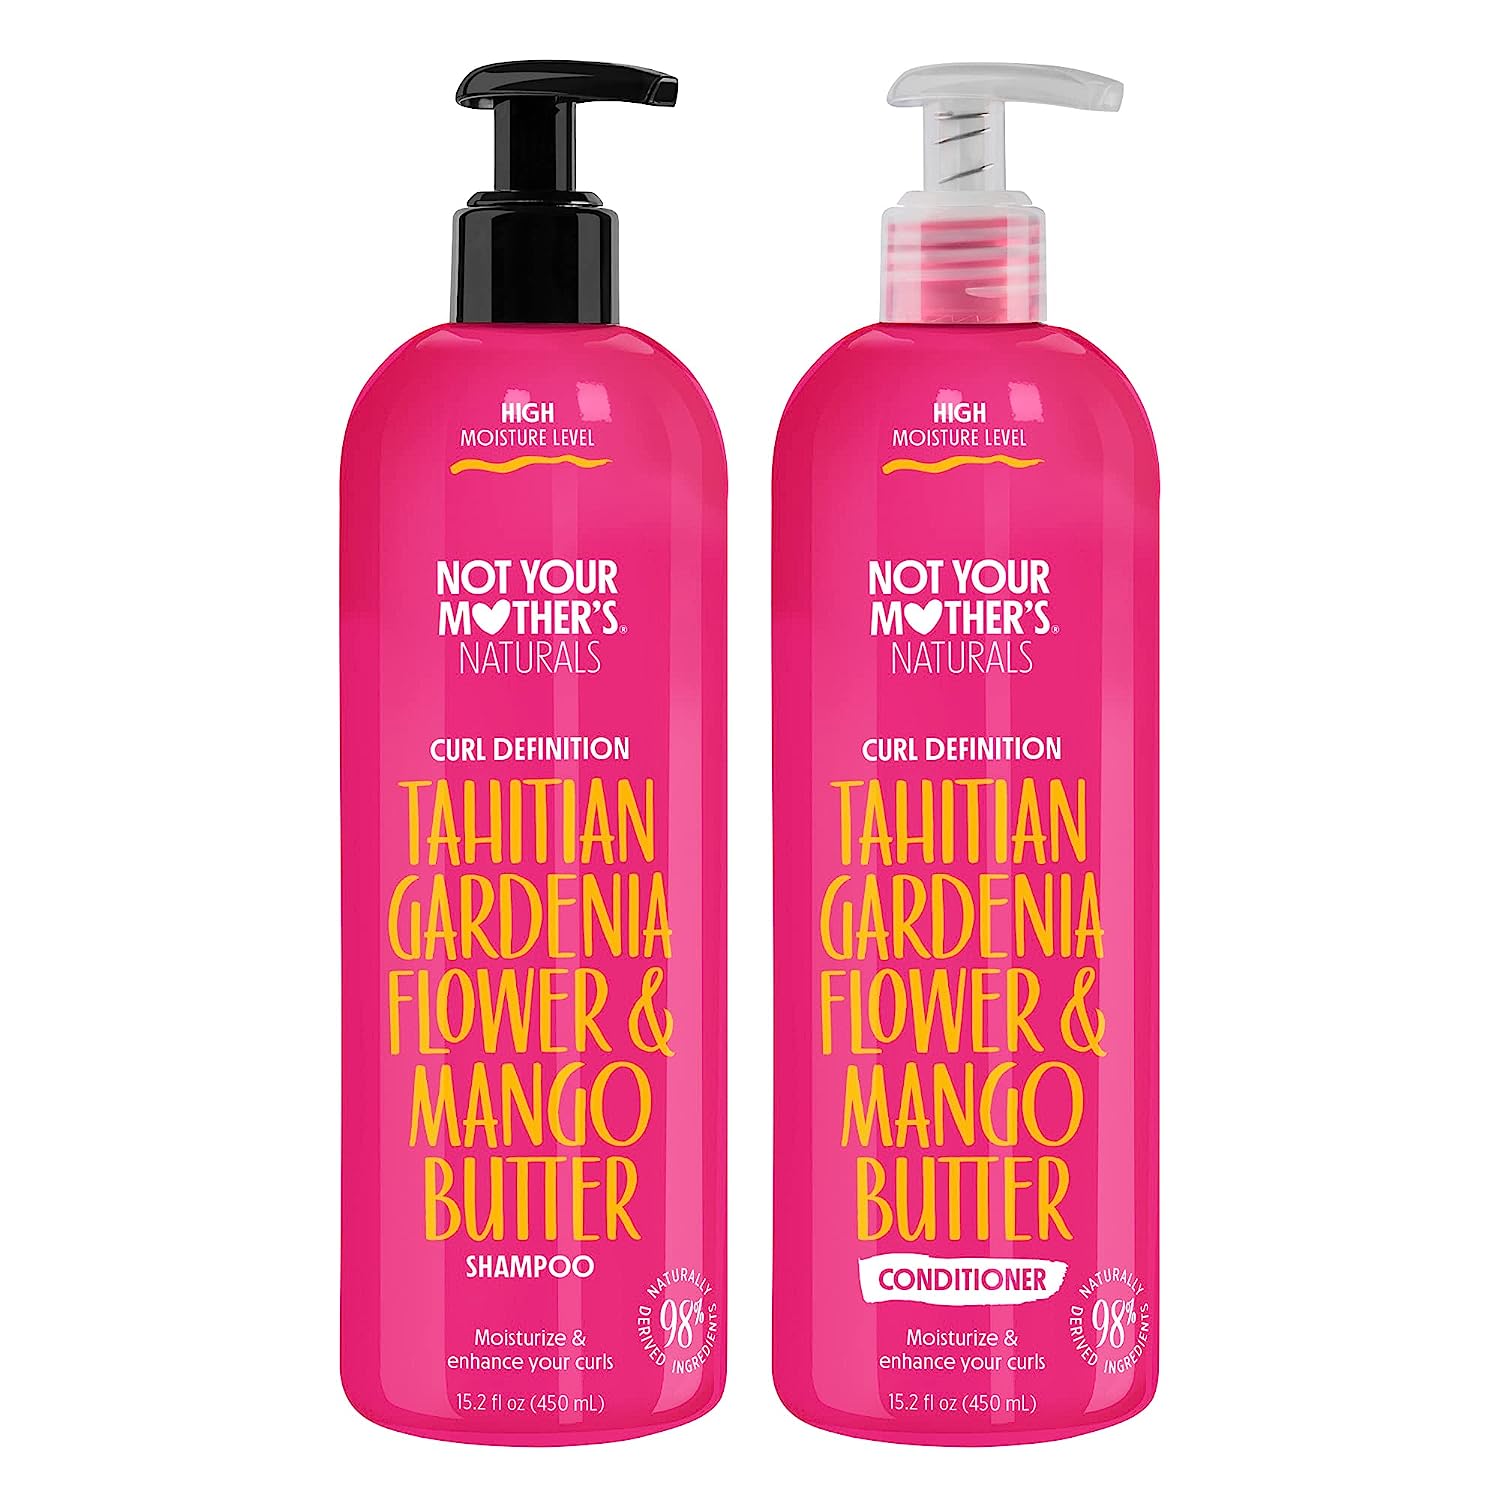 Not Your Mother's Naturals Shampoo and Conditioner [...]